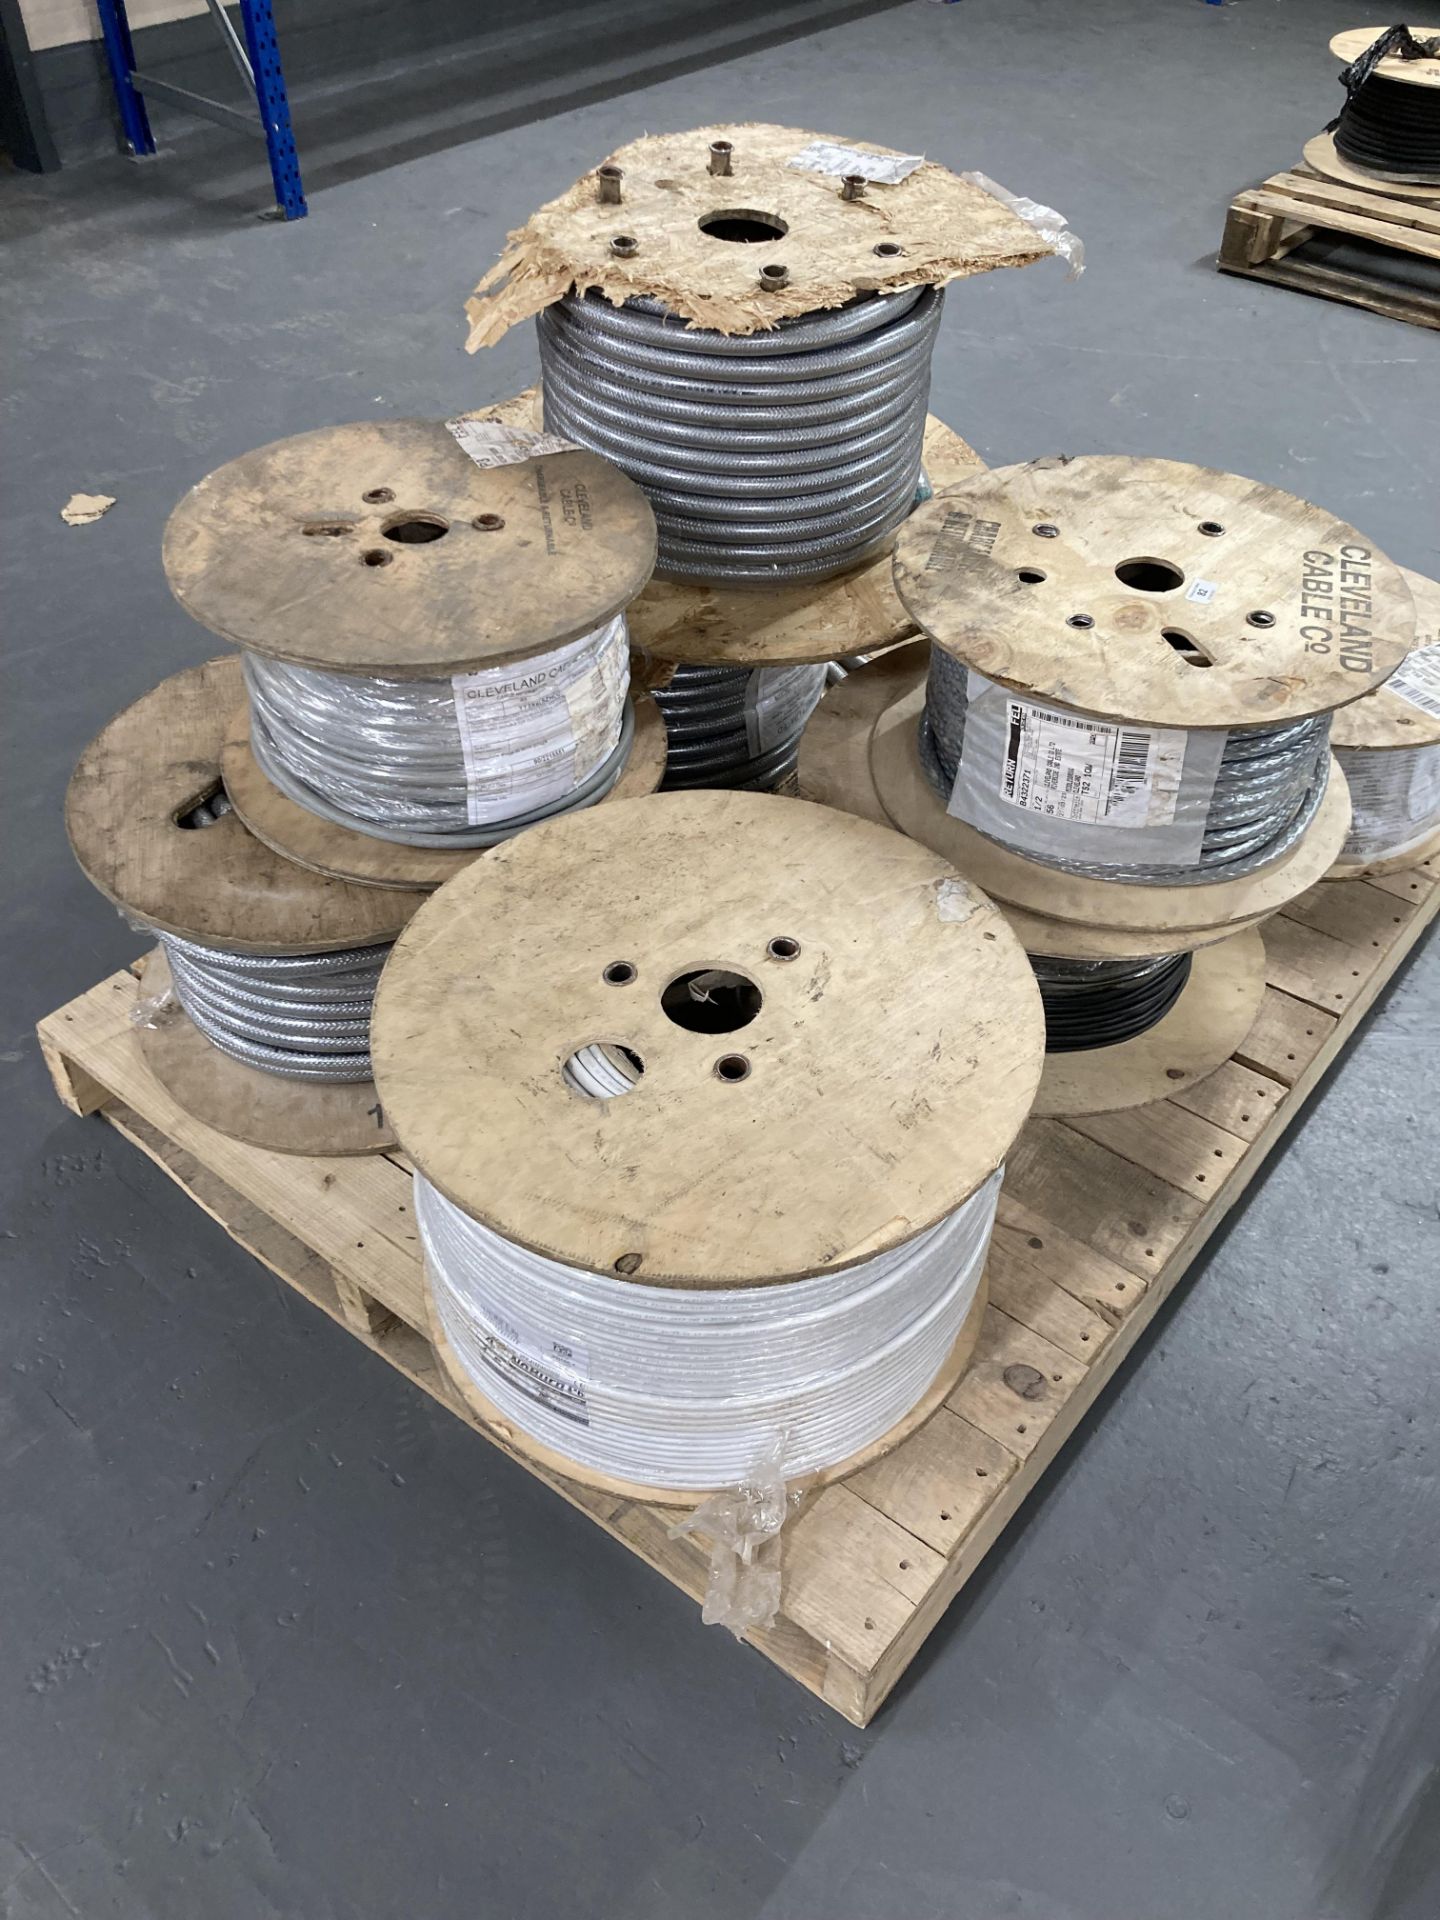 Eight spools of armoured and other electrical cable